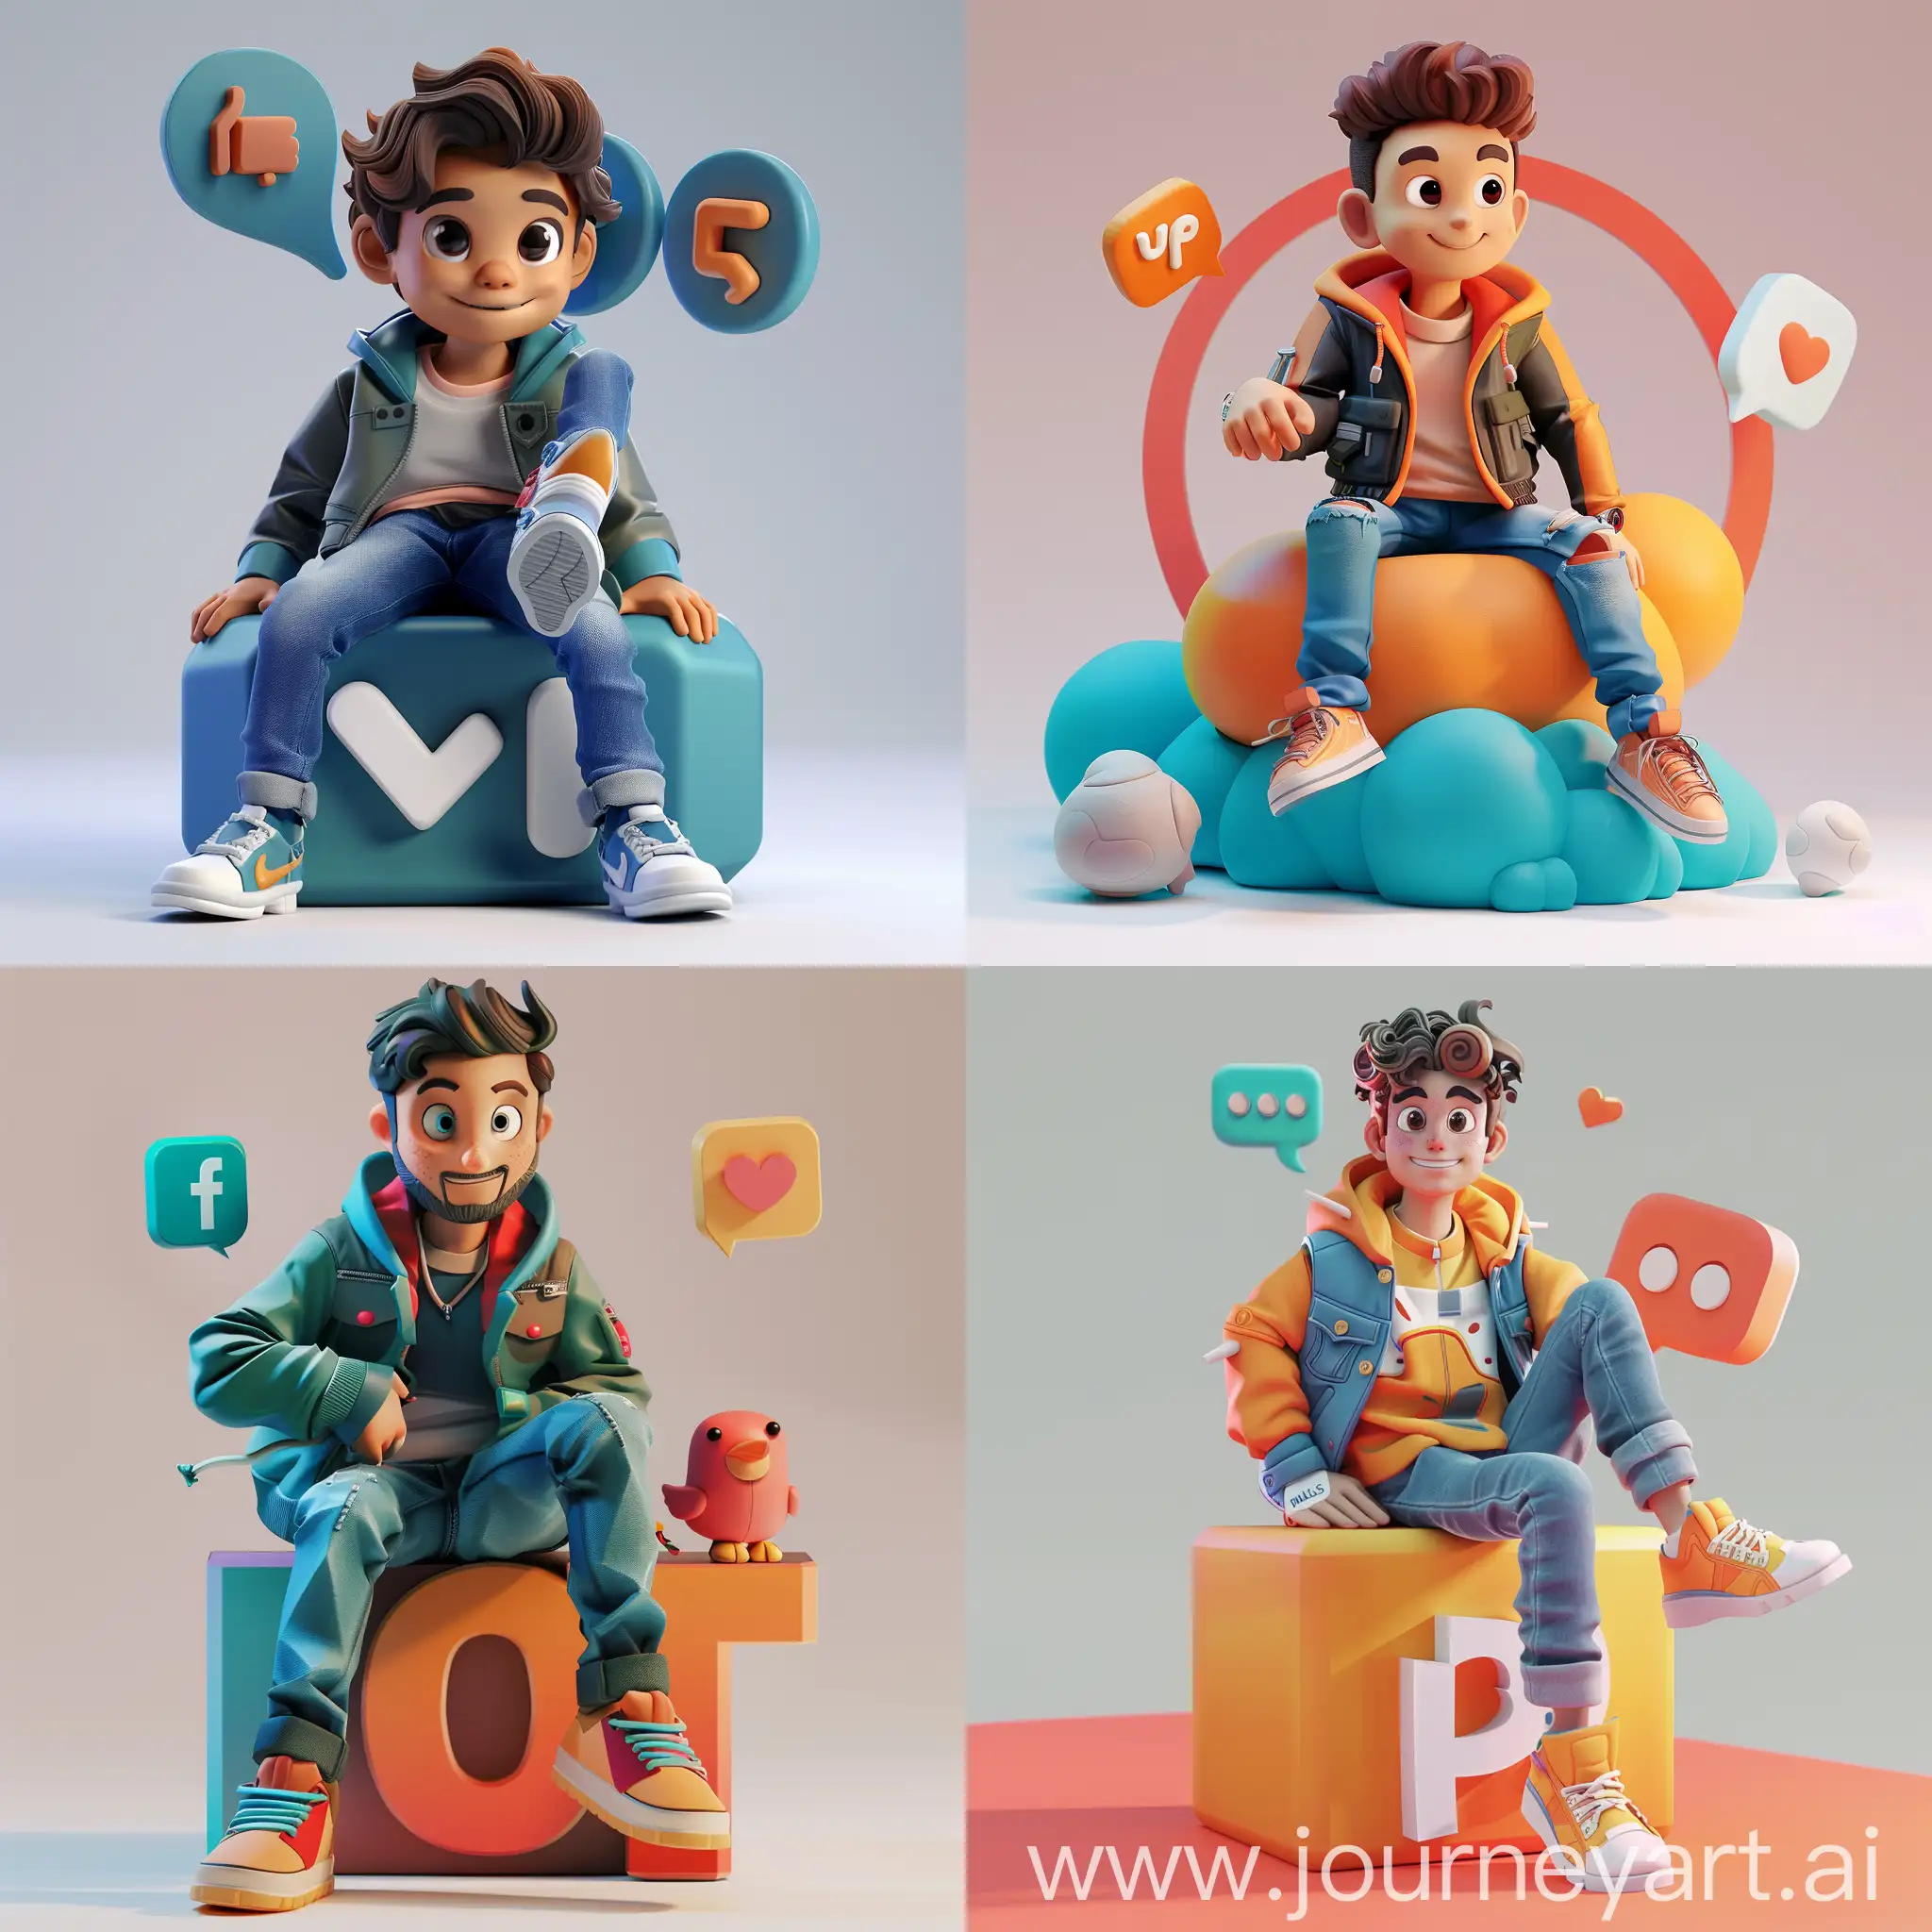 Create a 3D illustration of an animated character sitting casually on top of a social media logo "whats up". The character must wear casual modern clothing such as jeans jacket and sneakers shoes. The background of the image is a social media profile page with a user name "Palacious" and a profile picture that match.